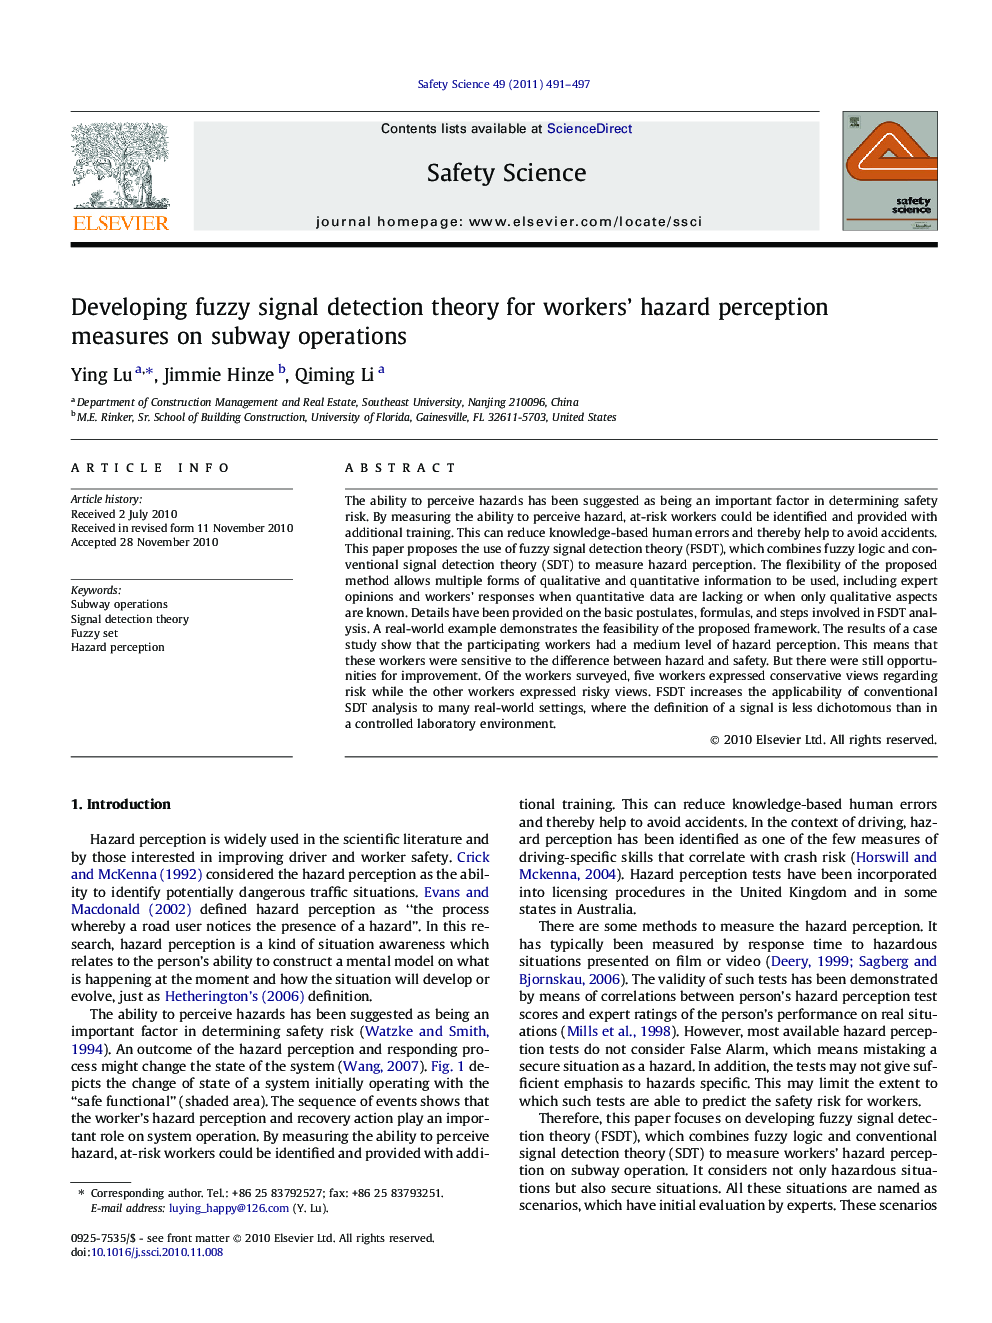 Developing fuzzy signal detection theory for workers’ hazard perception measures on subway operations